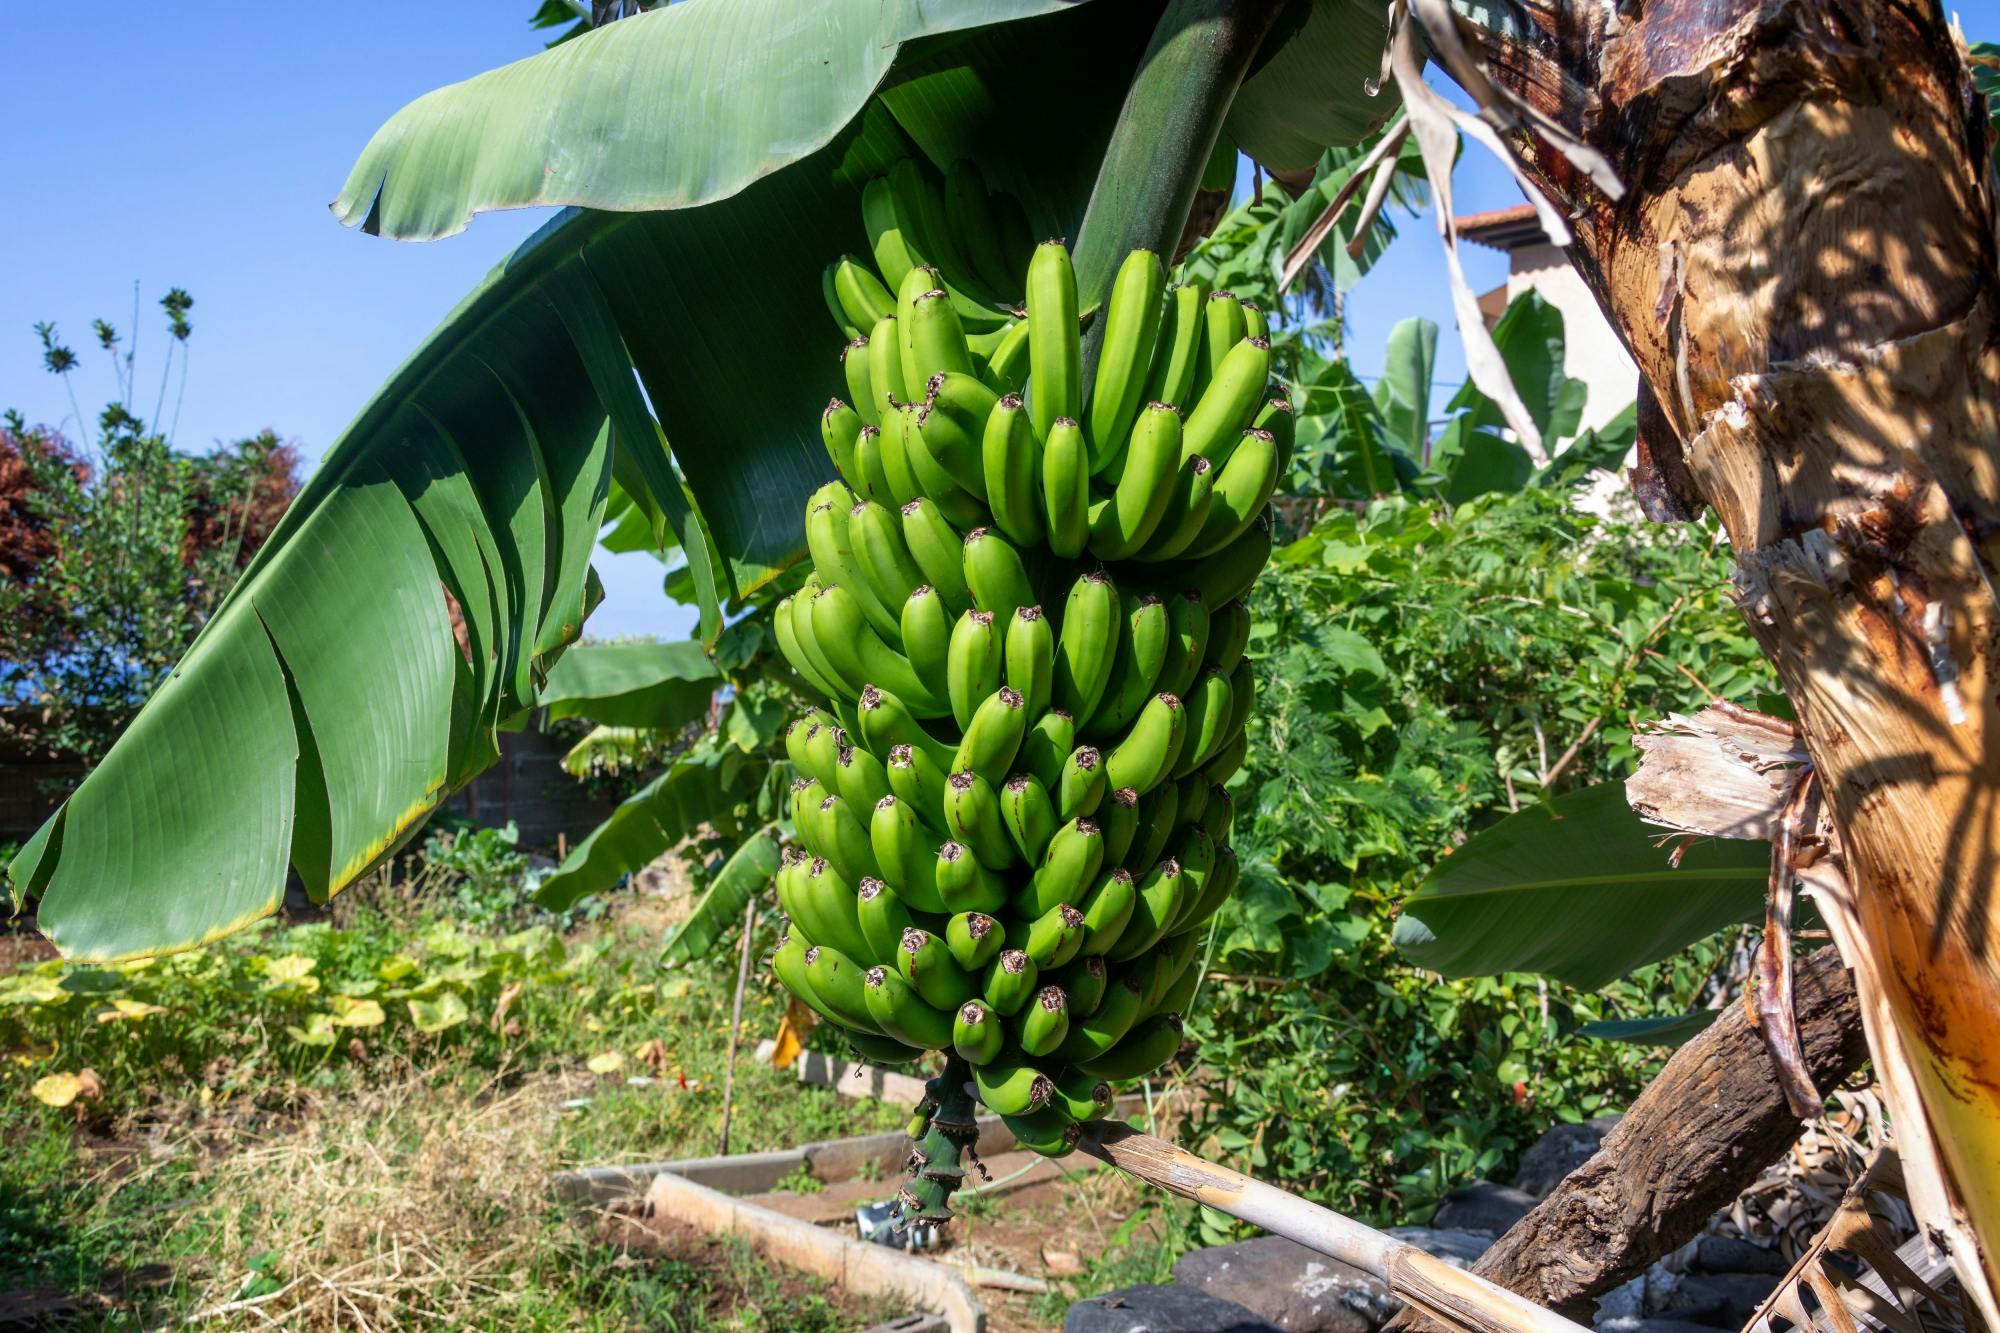 Western Madeira Tour with Banana Plantation and Lunchm